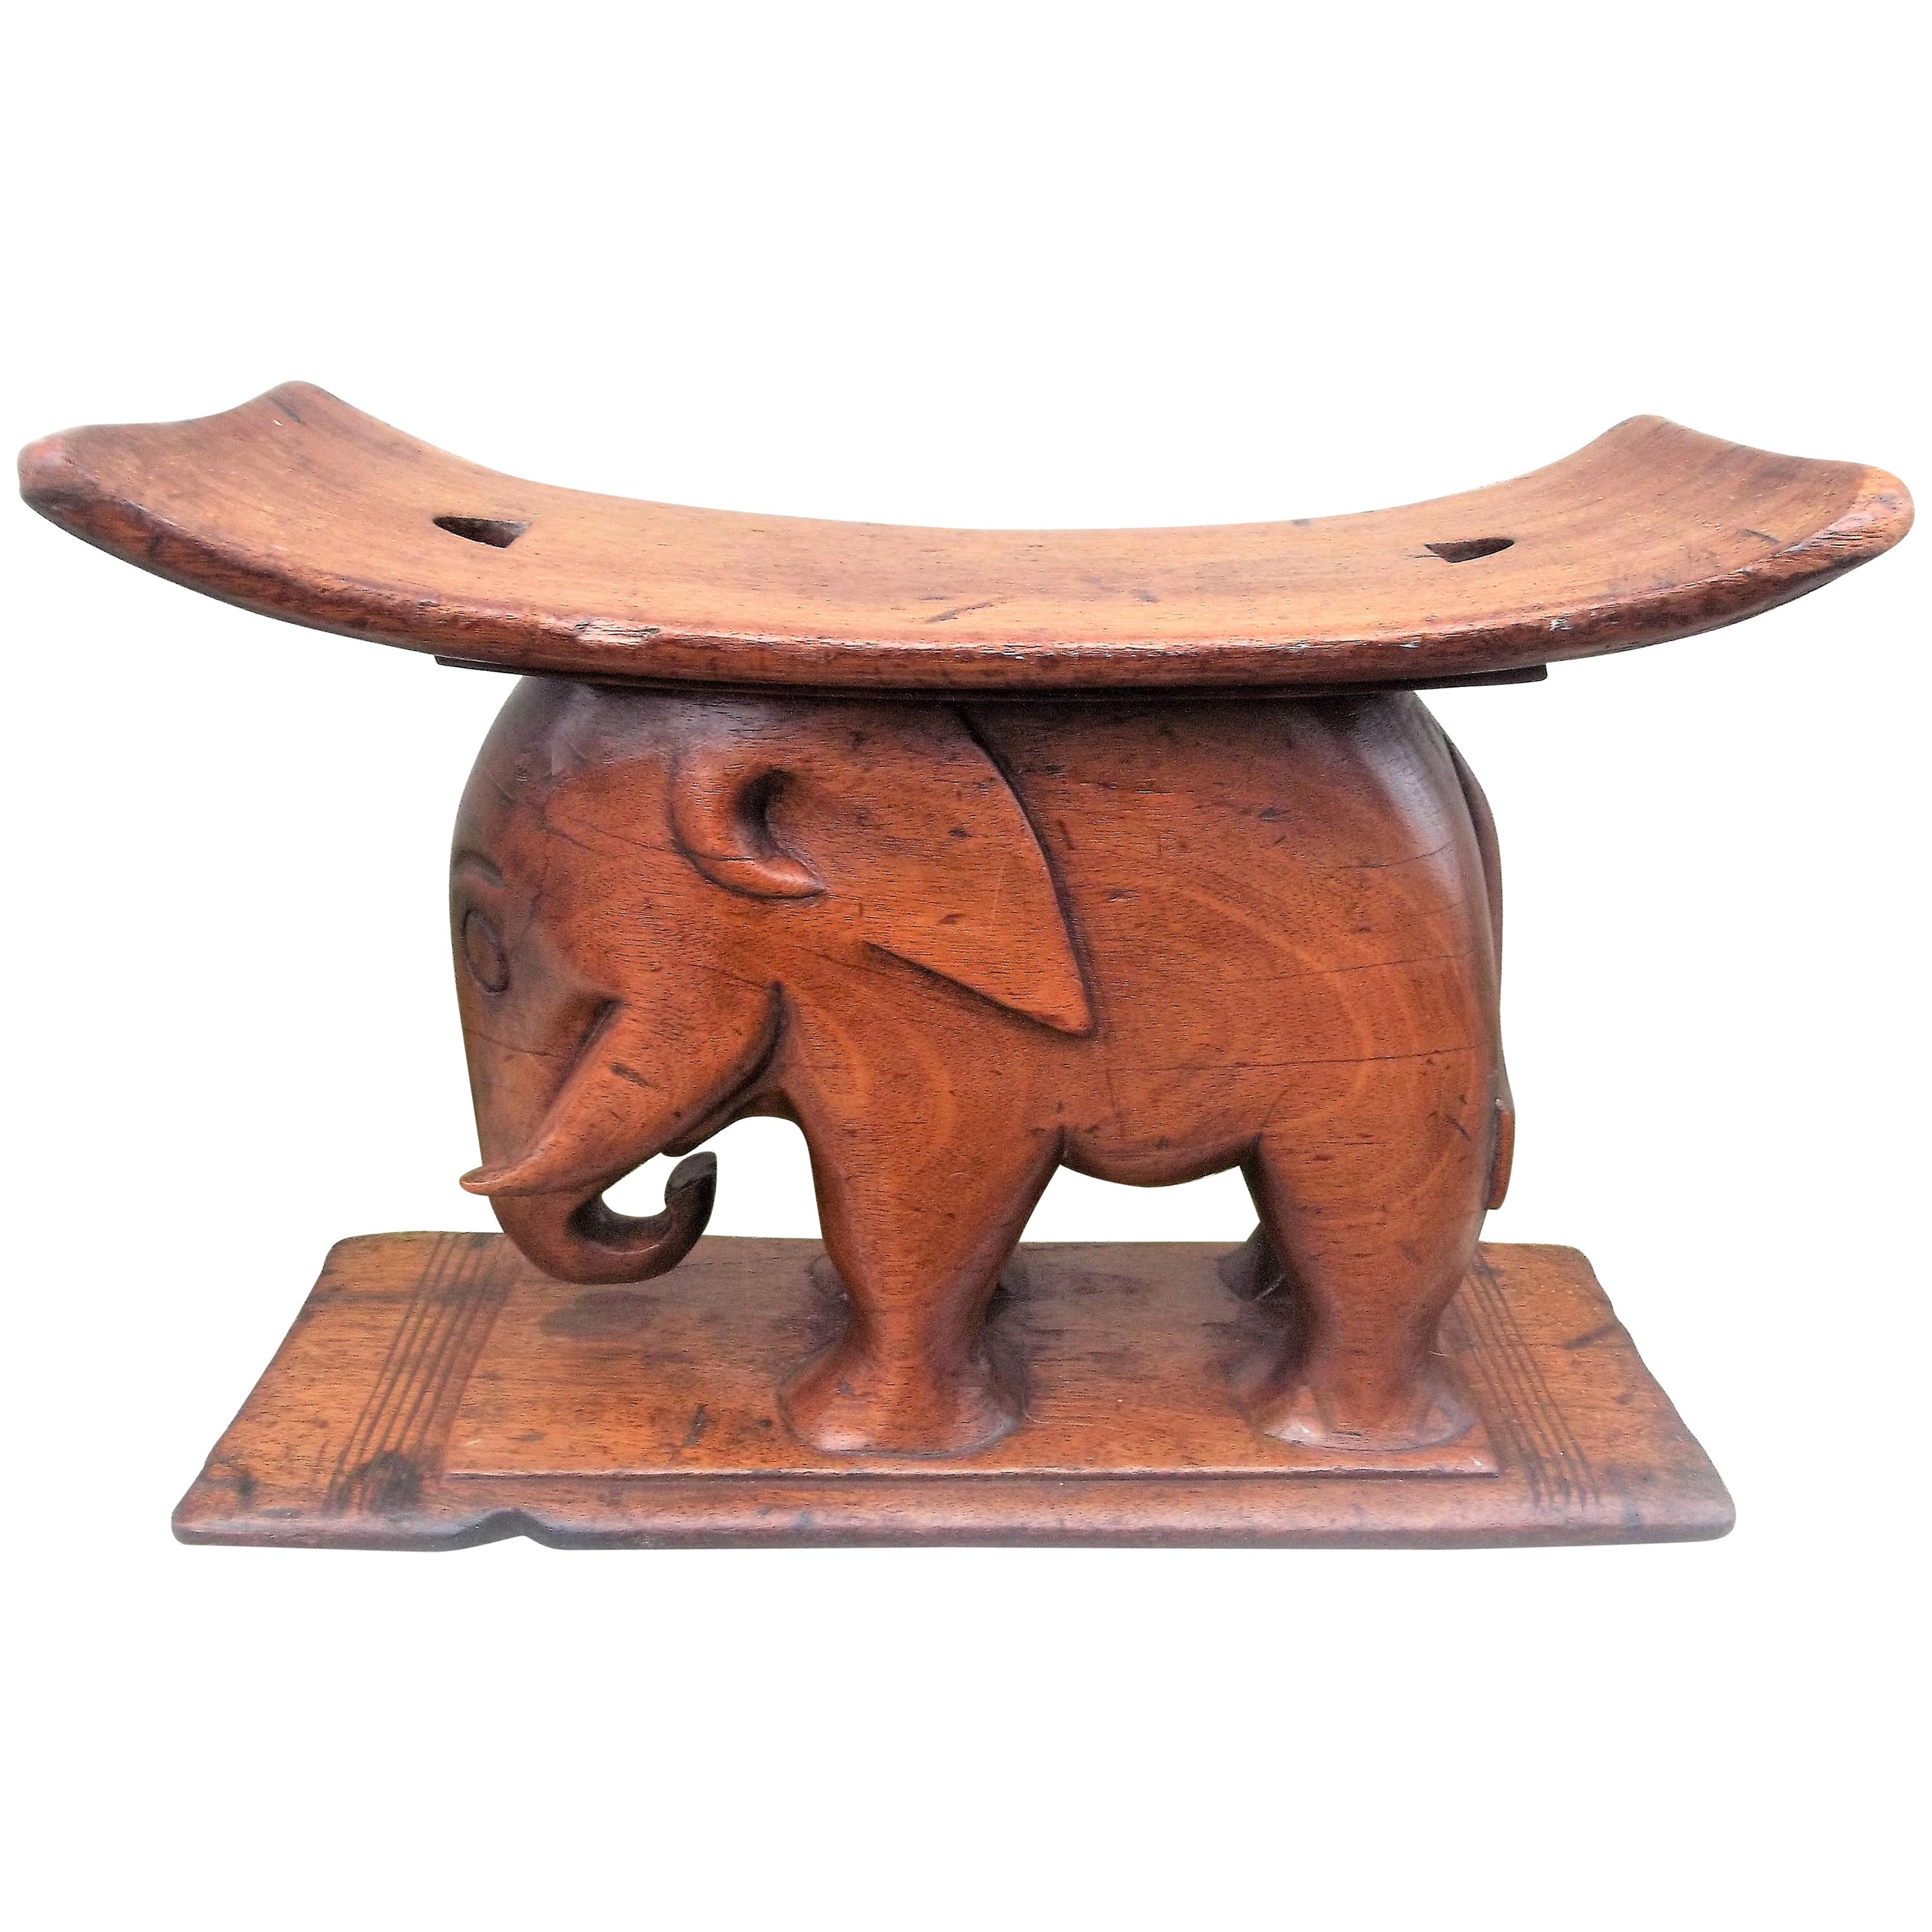 Antique African Walnut Pillow Stand and Stool Carved in Elephant Form